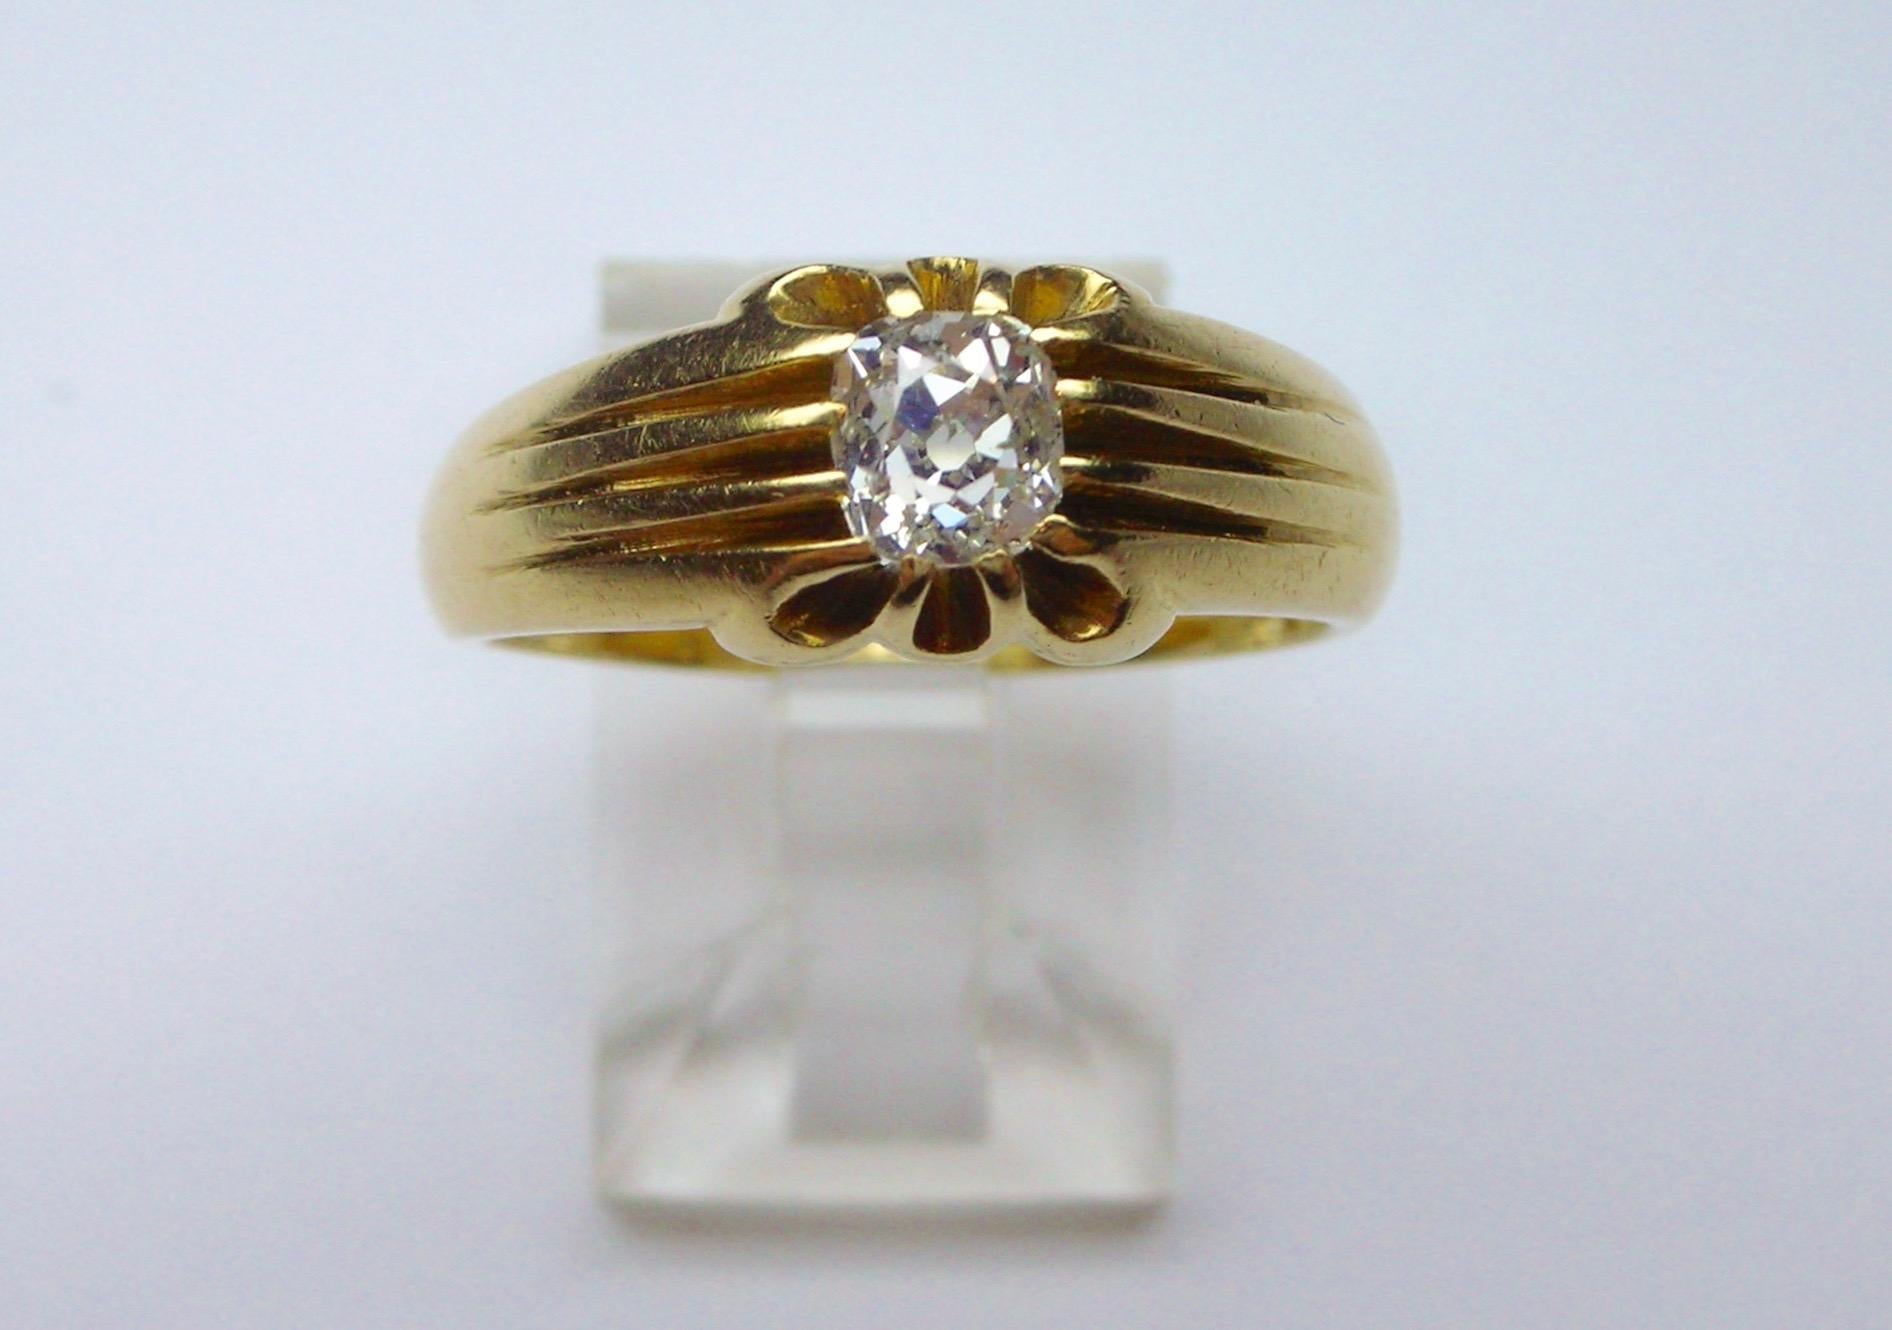 Solitaire ring with antique cushion cut diamond, of 0.60ct. circa, set in 18ct gold, from the end of the 19th Century circa. 